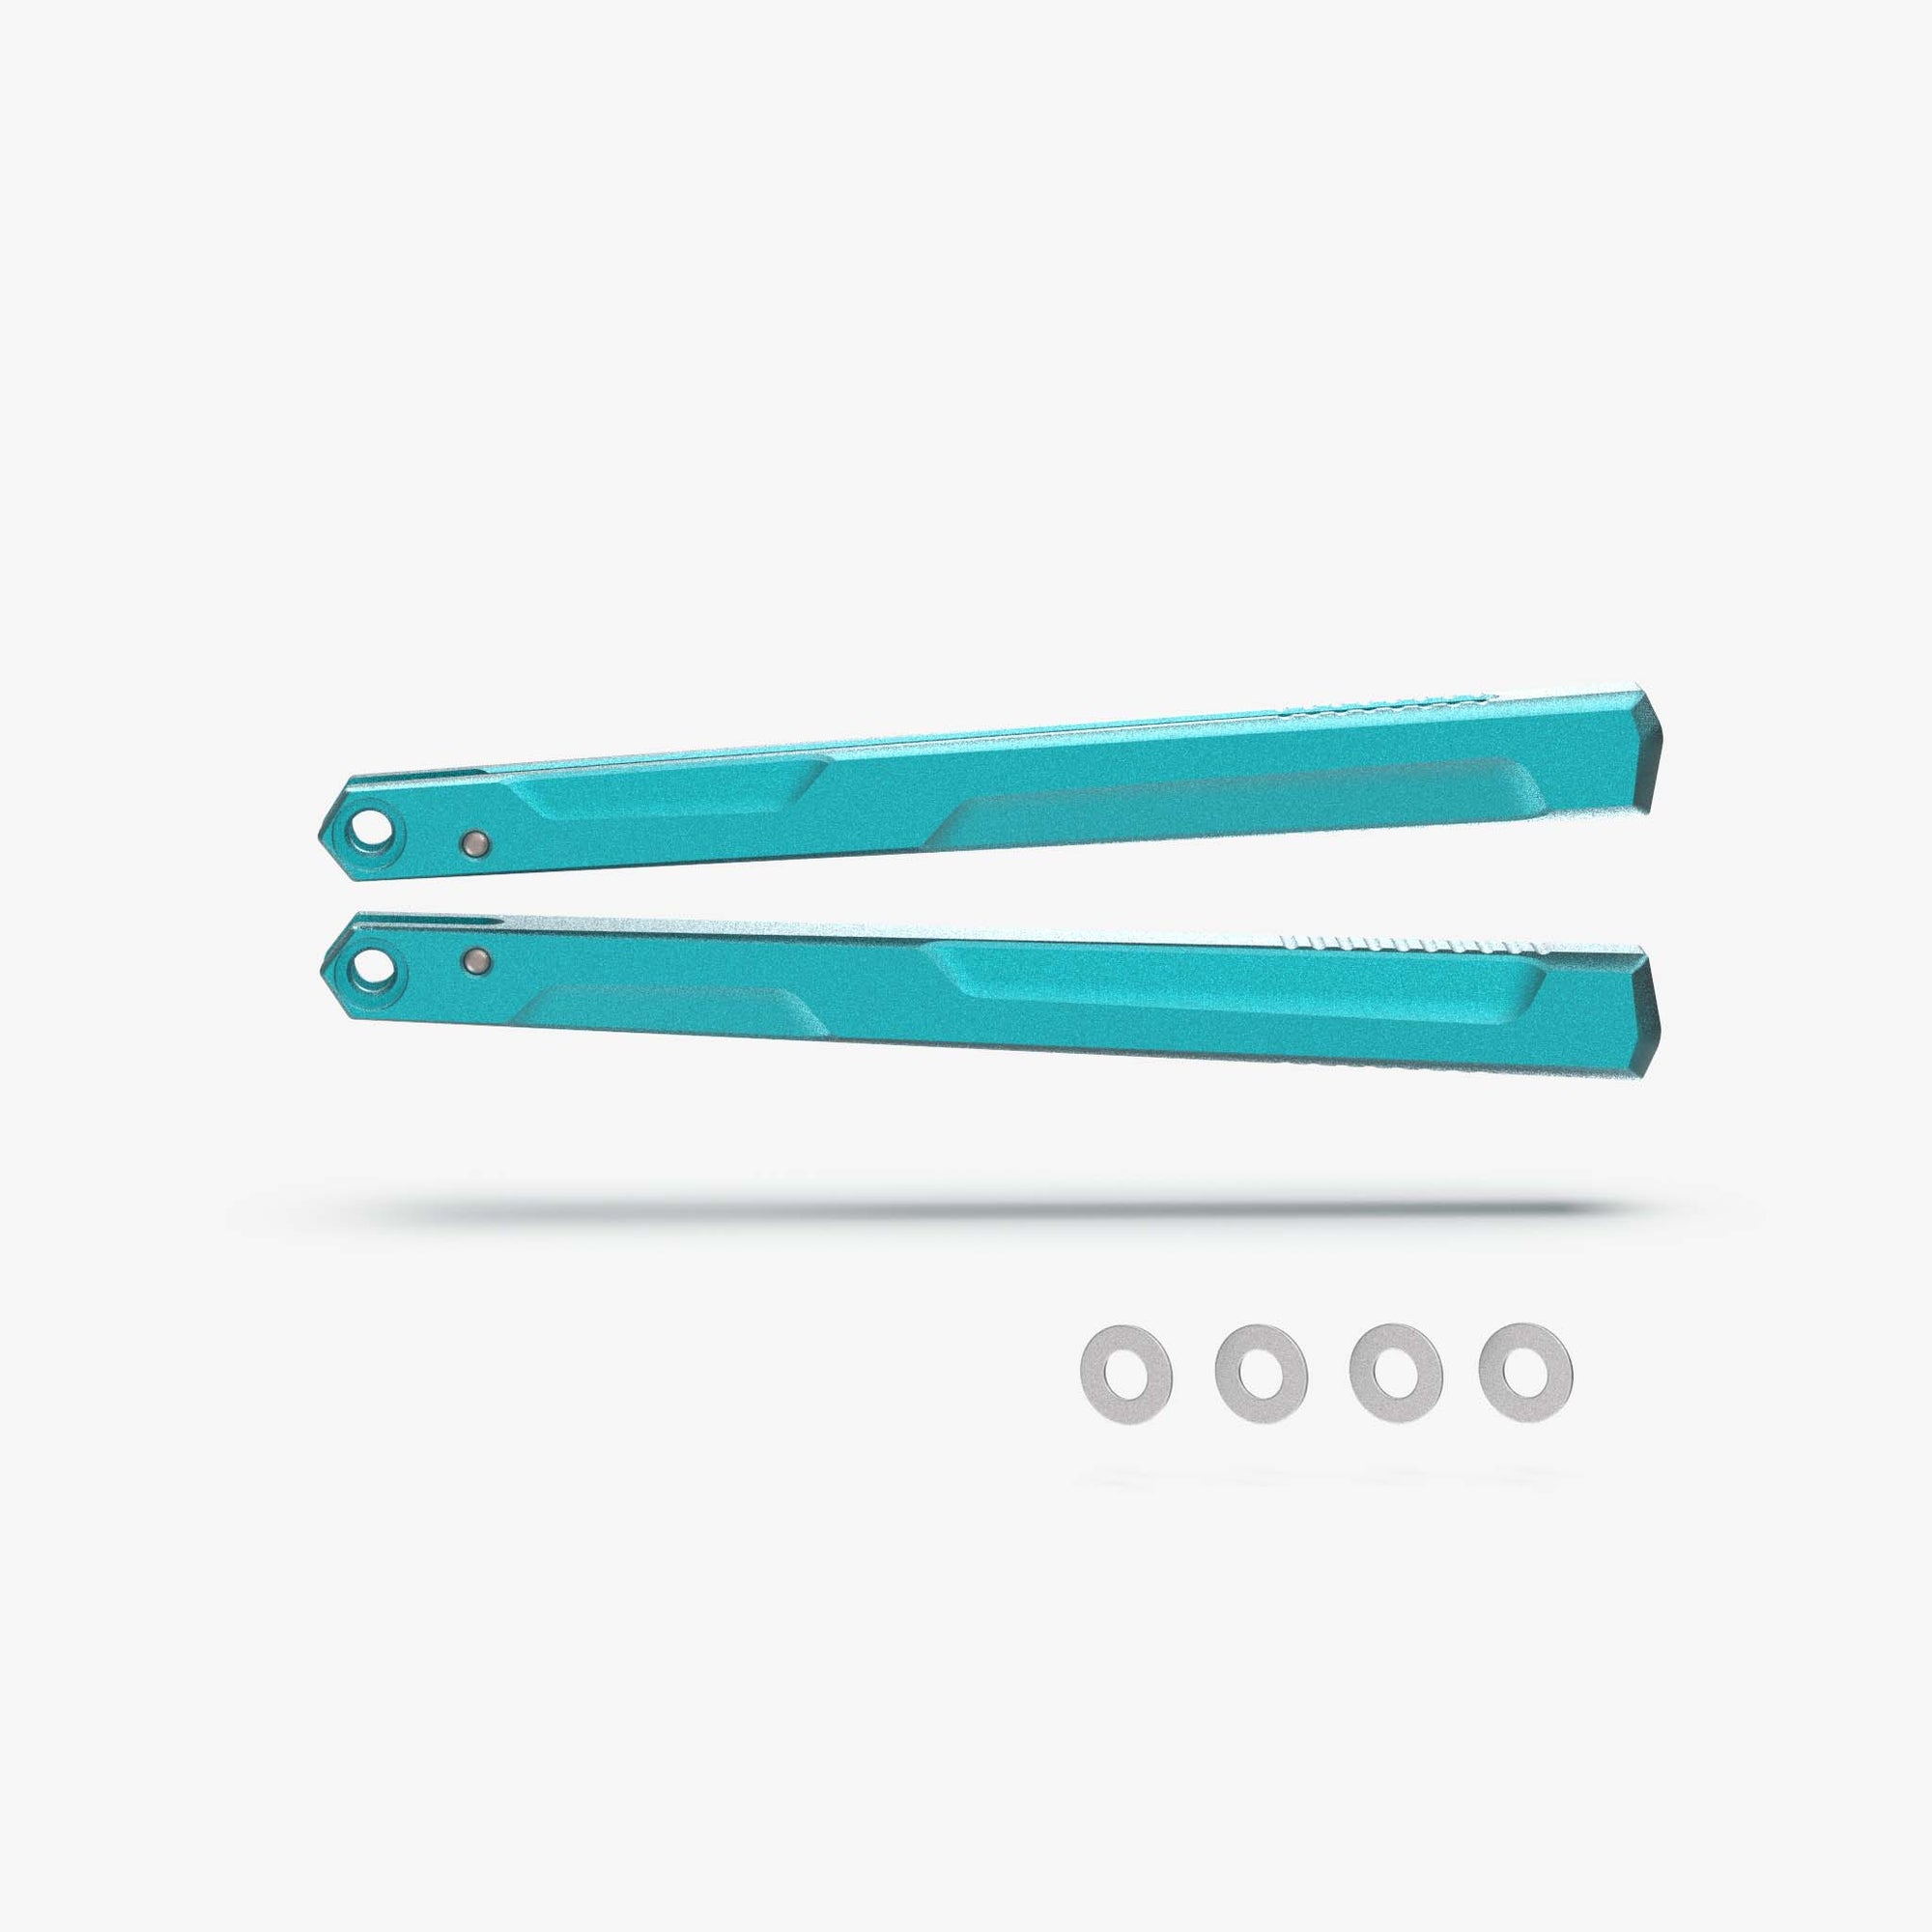 Aluminum v1.5 Handles for the Kershaw Lucha Balisong-Riptide Teal